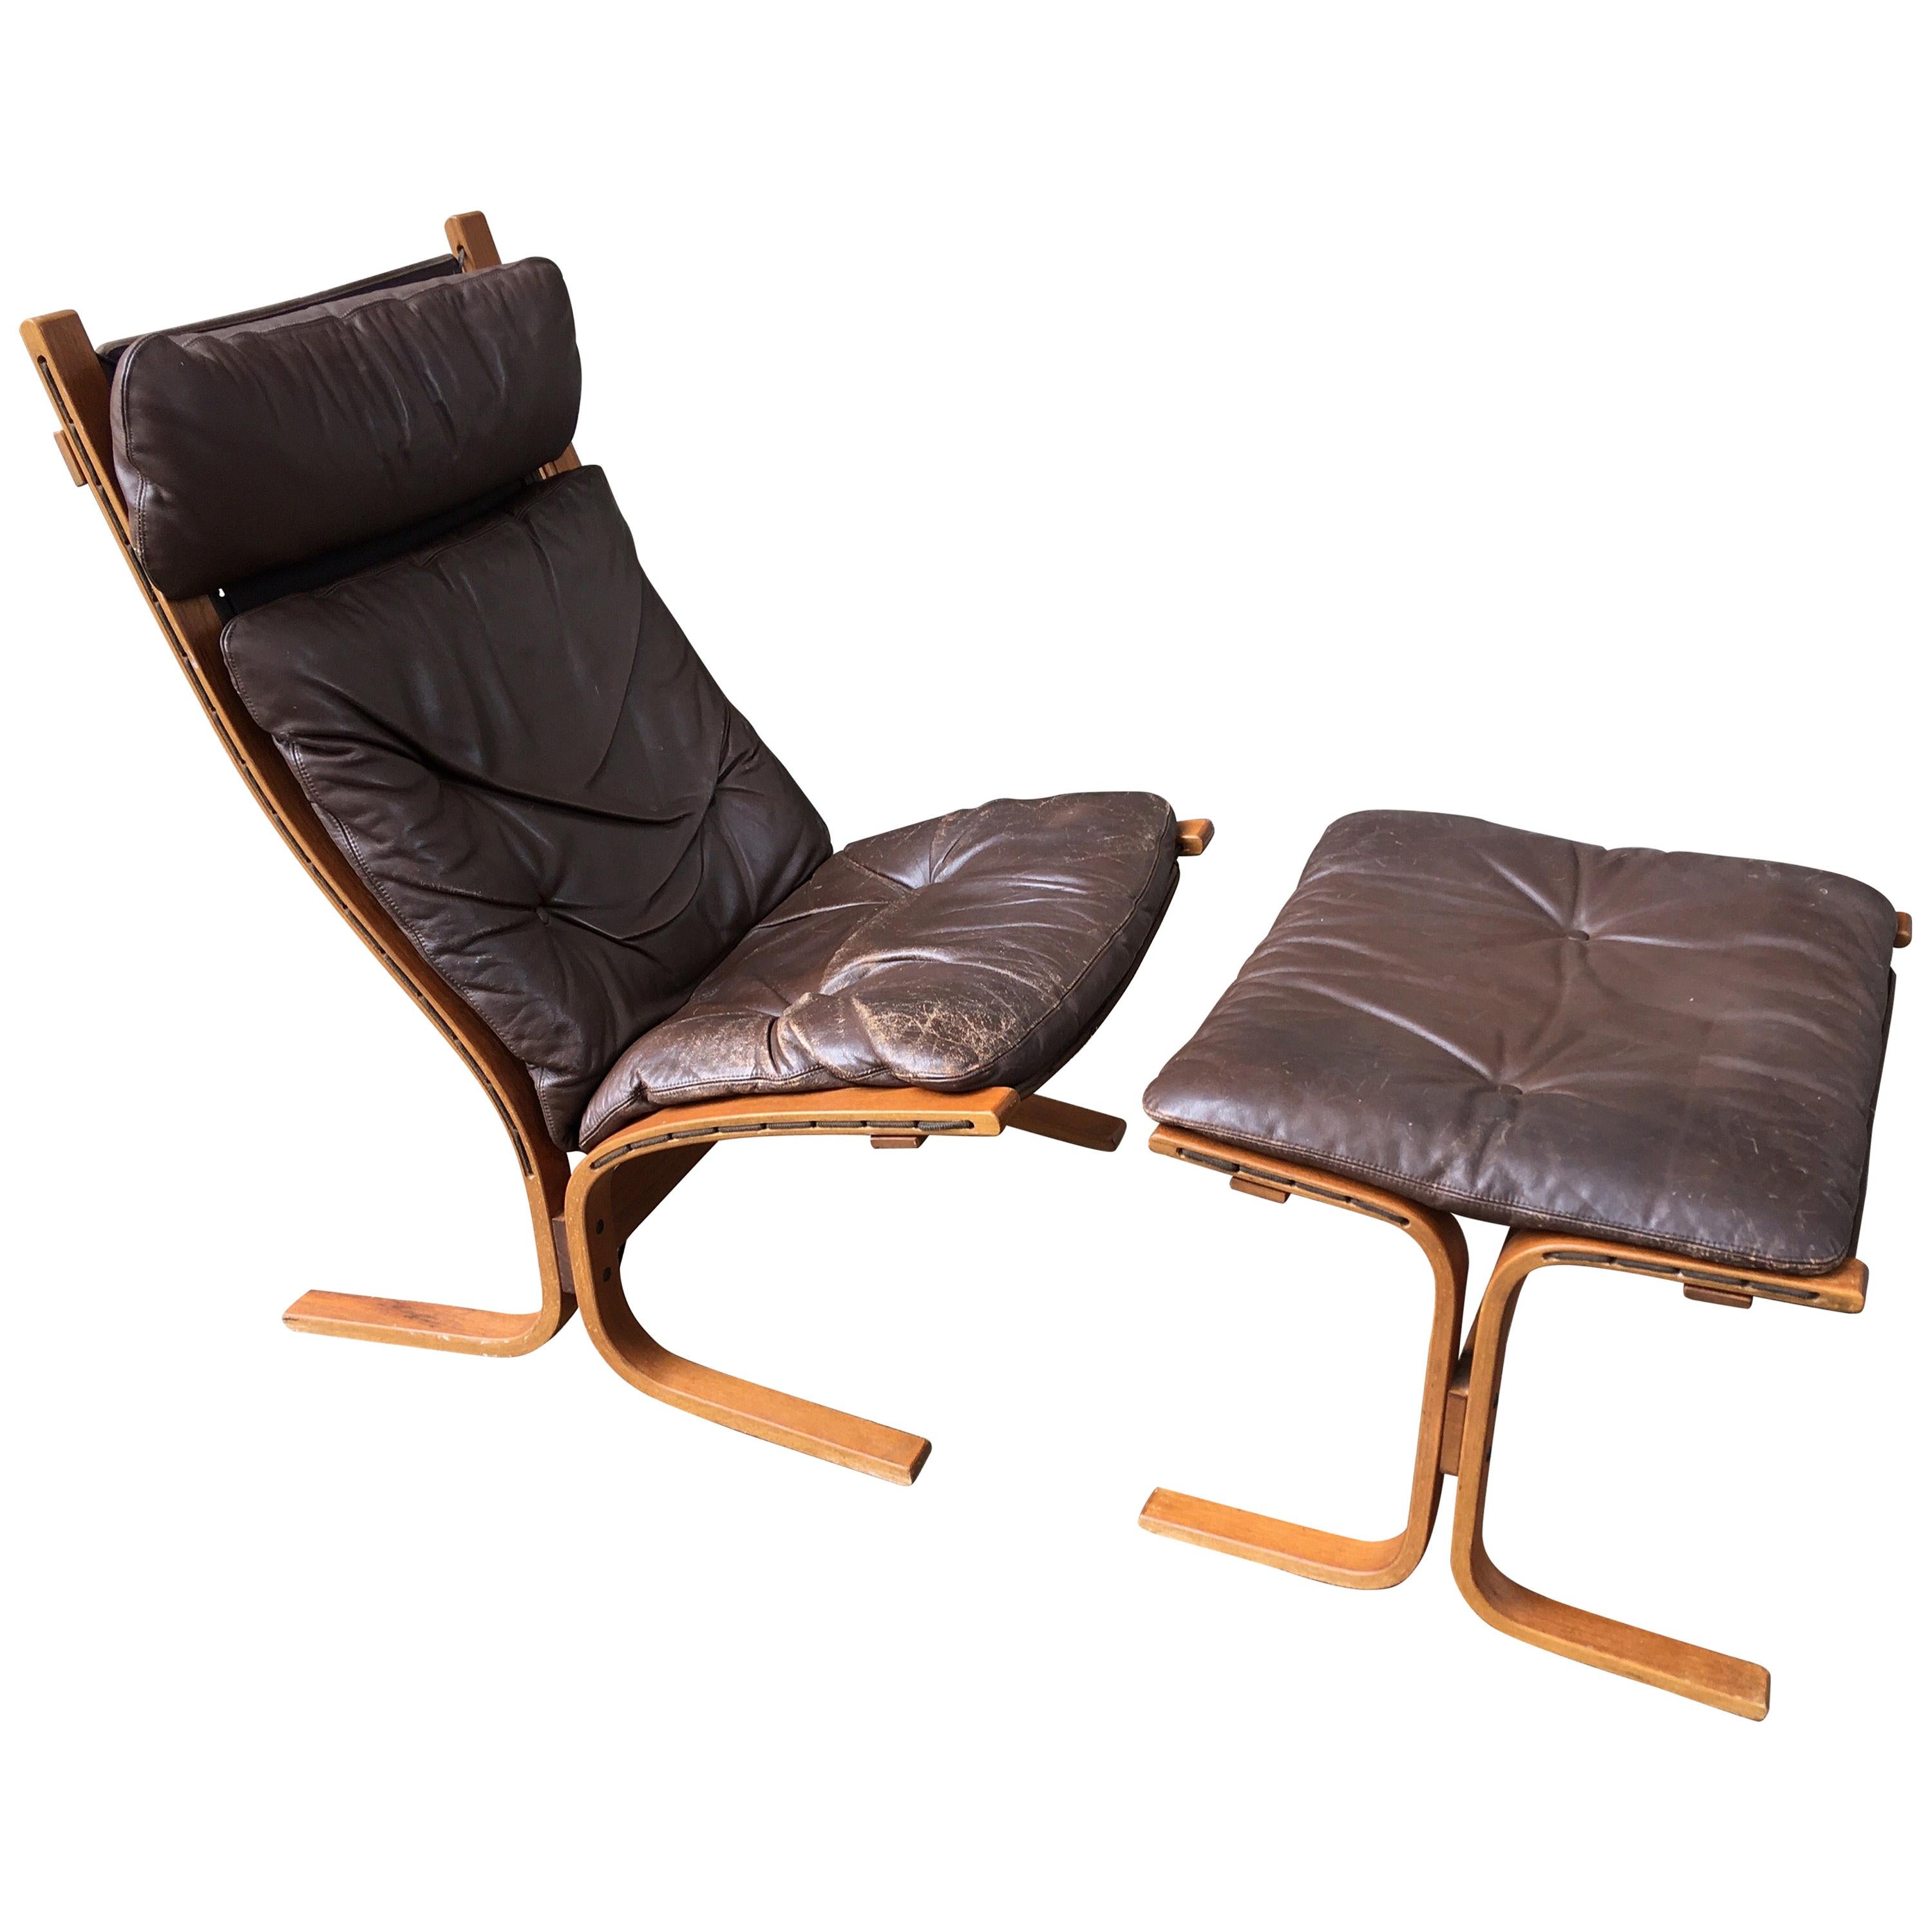 Westnofa Siesta Leather Lounge Chair and Ottoman designed by Ingmar Relling